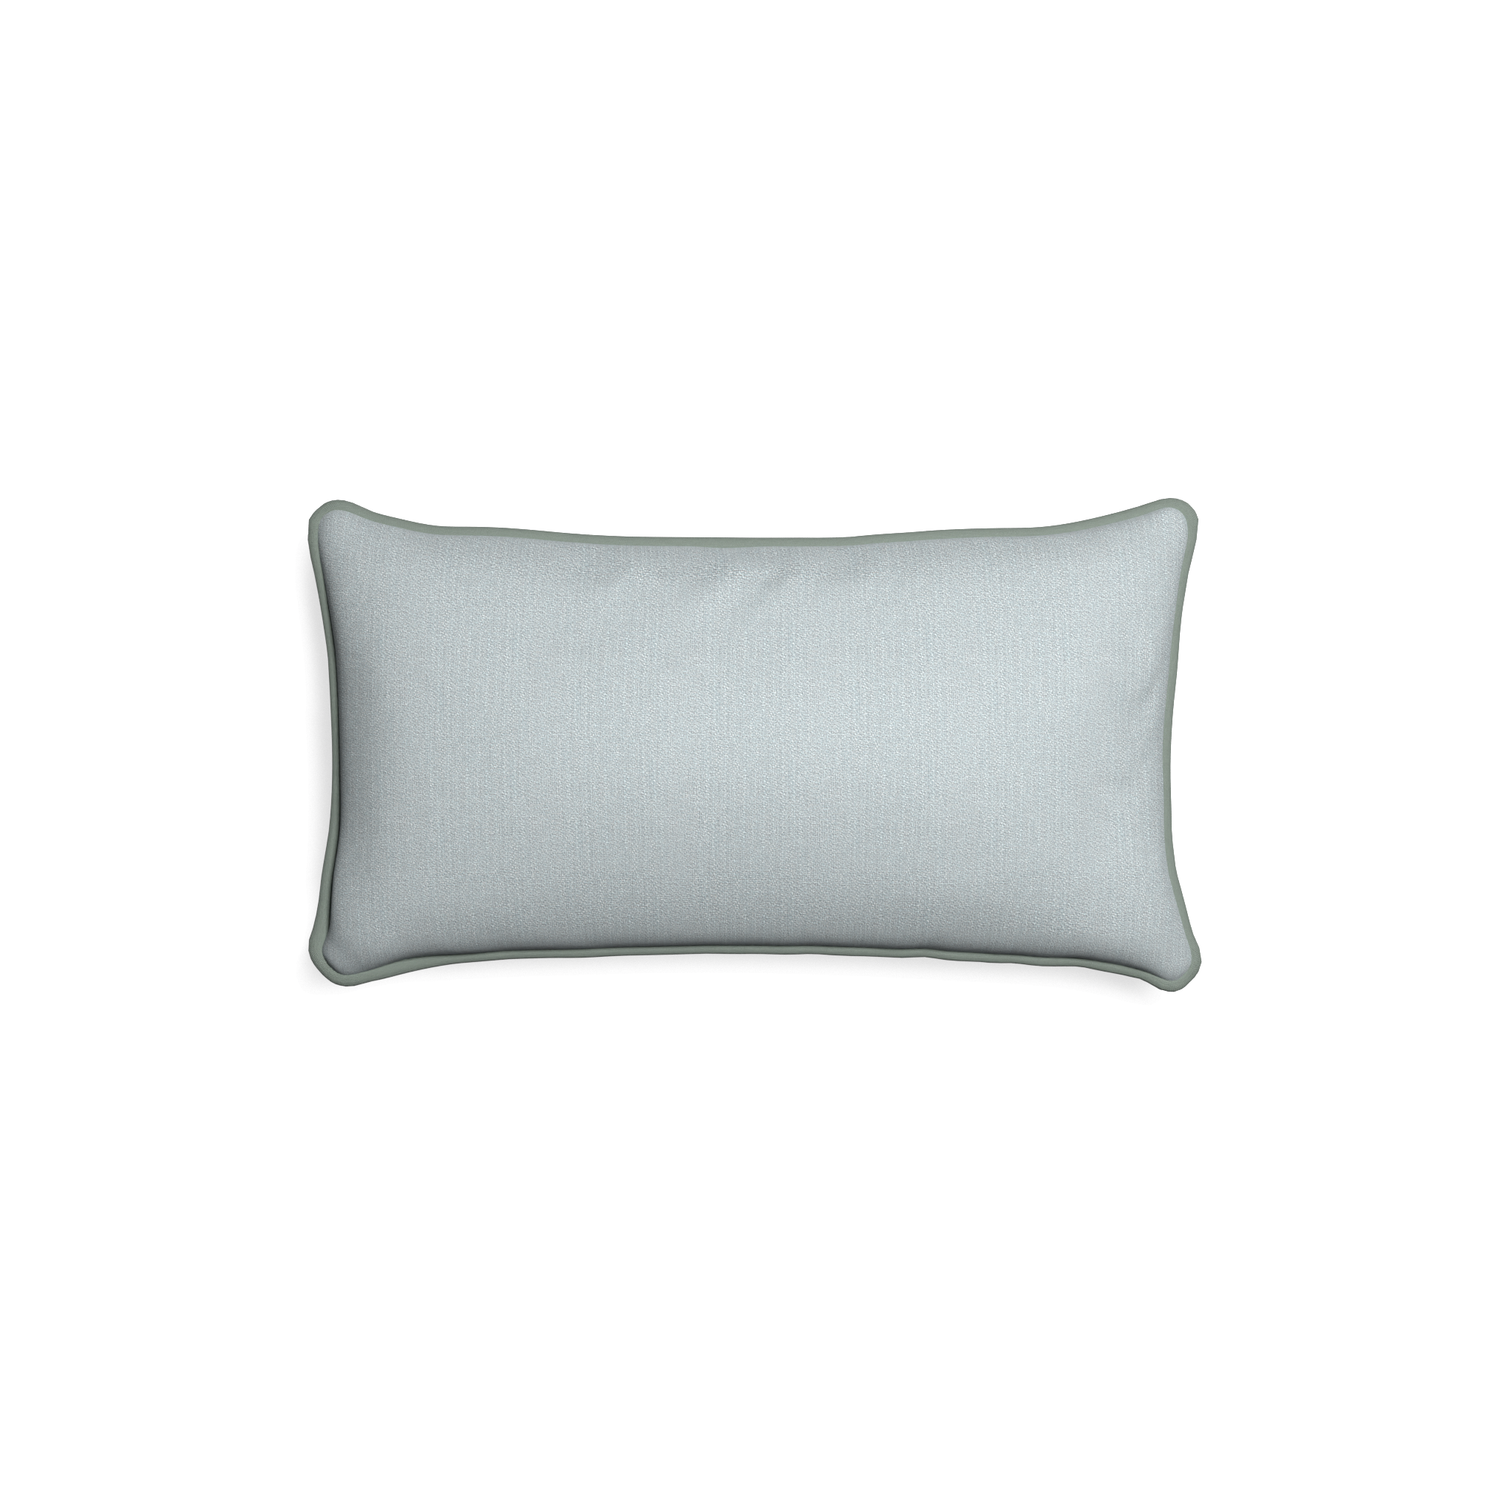 Petite-lumbar sea custom grey bluepillow with sage piping on white background